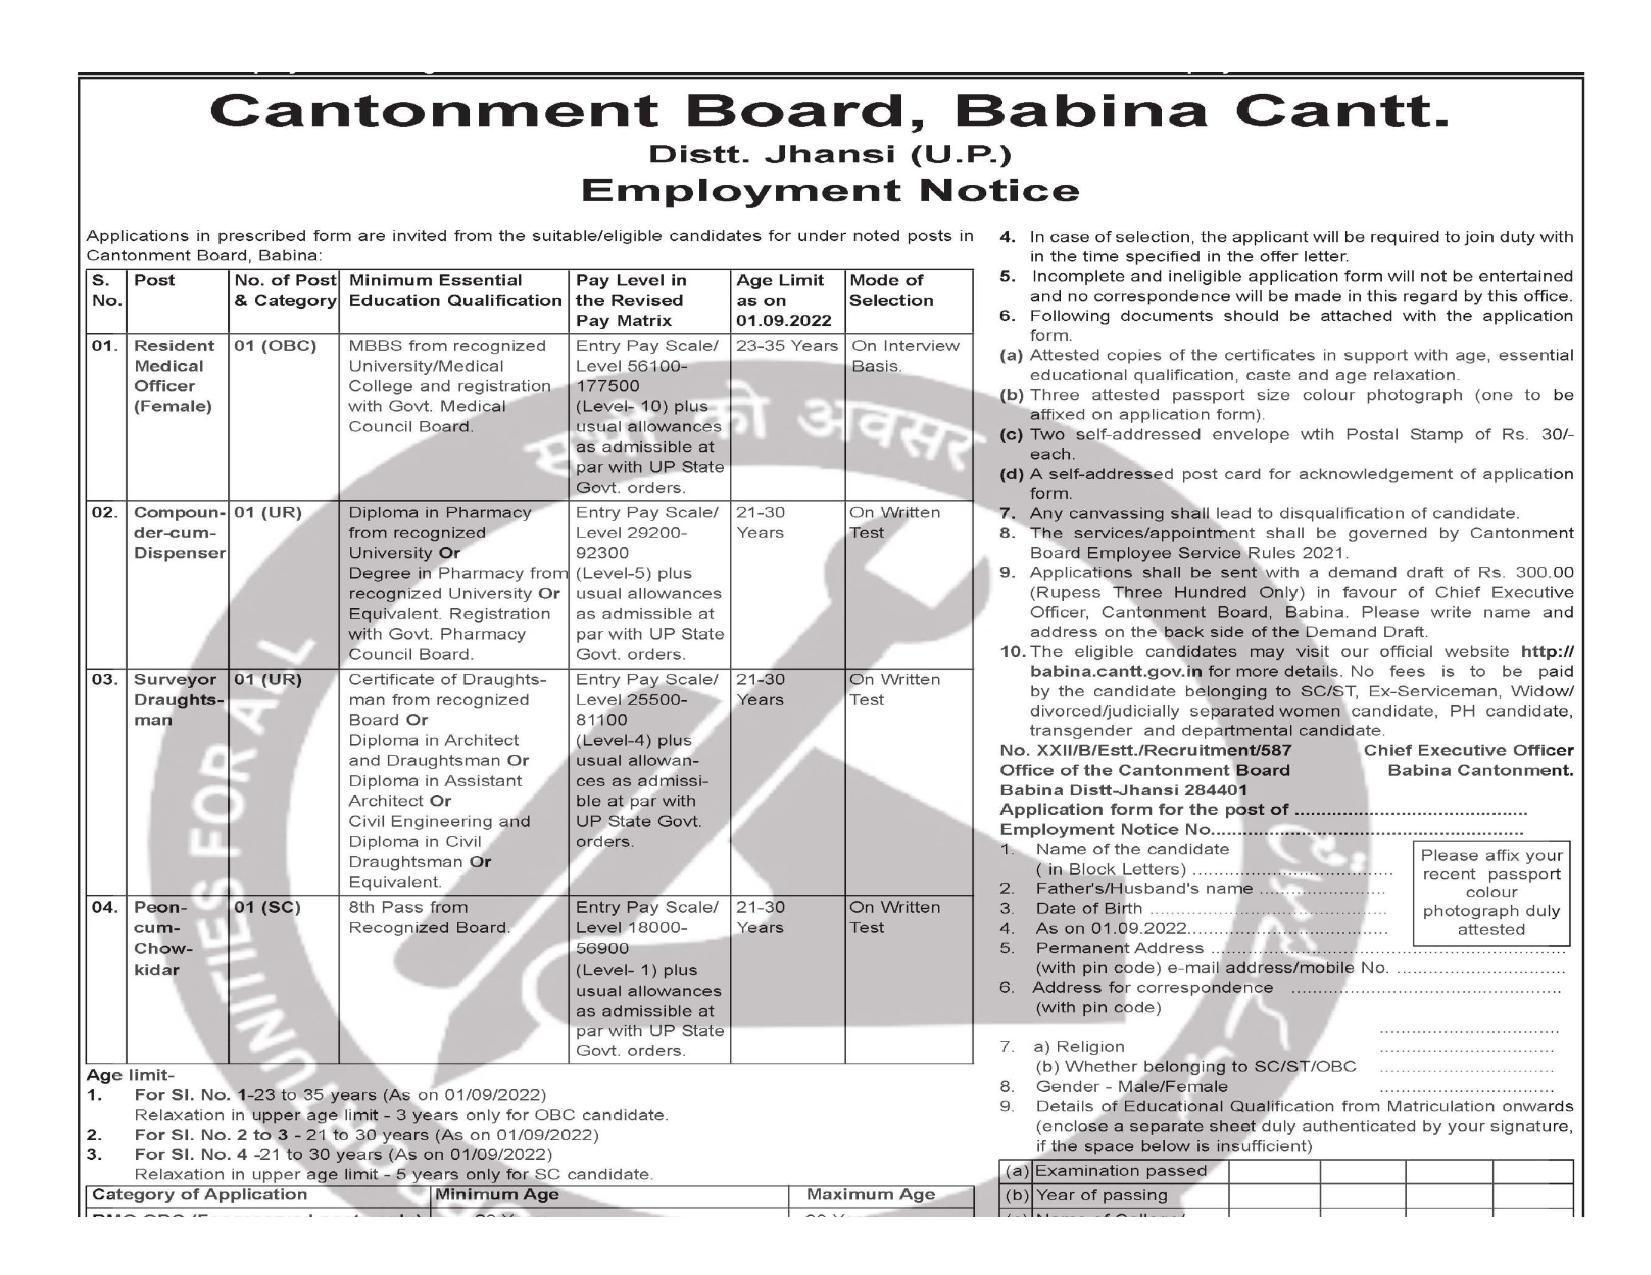 Cantonment Board Babina Invites Application for Peon and Chowkidar, Surveyor Draughtsman, More Vacancies Recruitment 2022 - Page 2